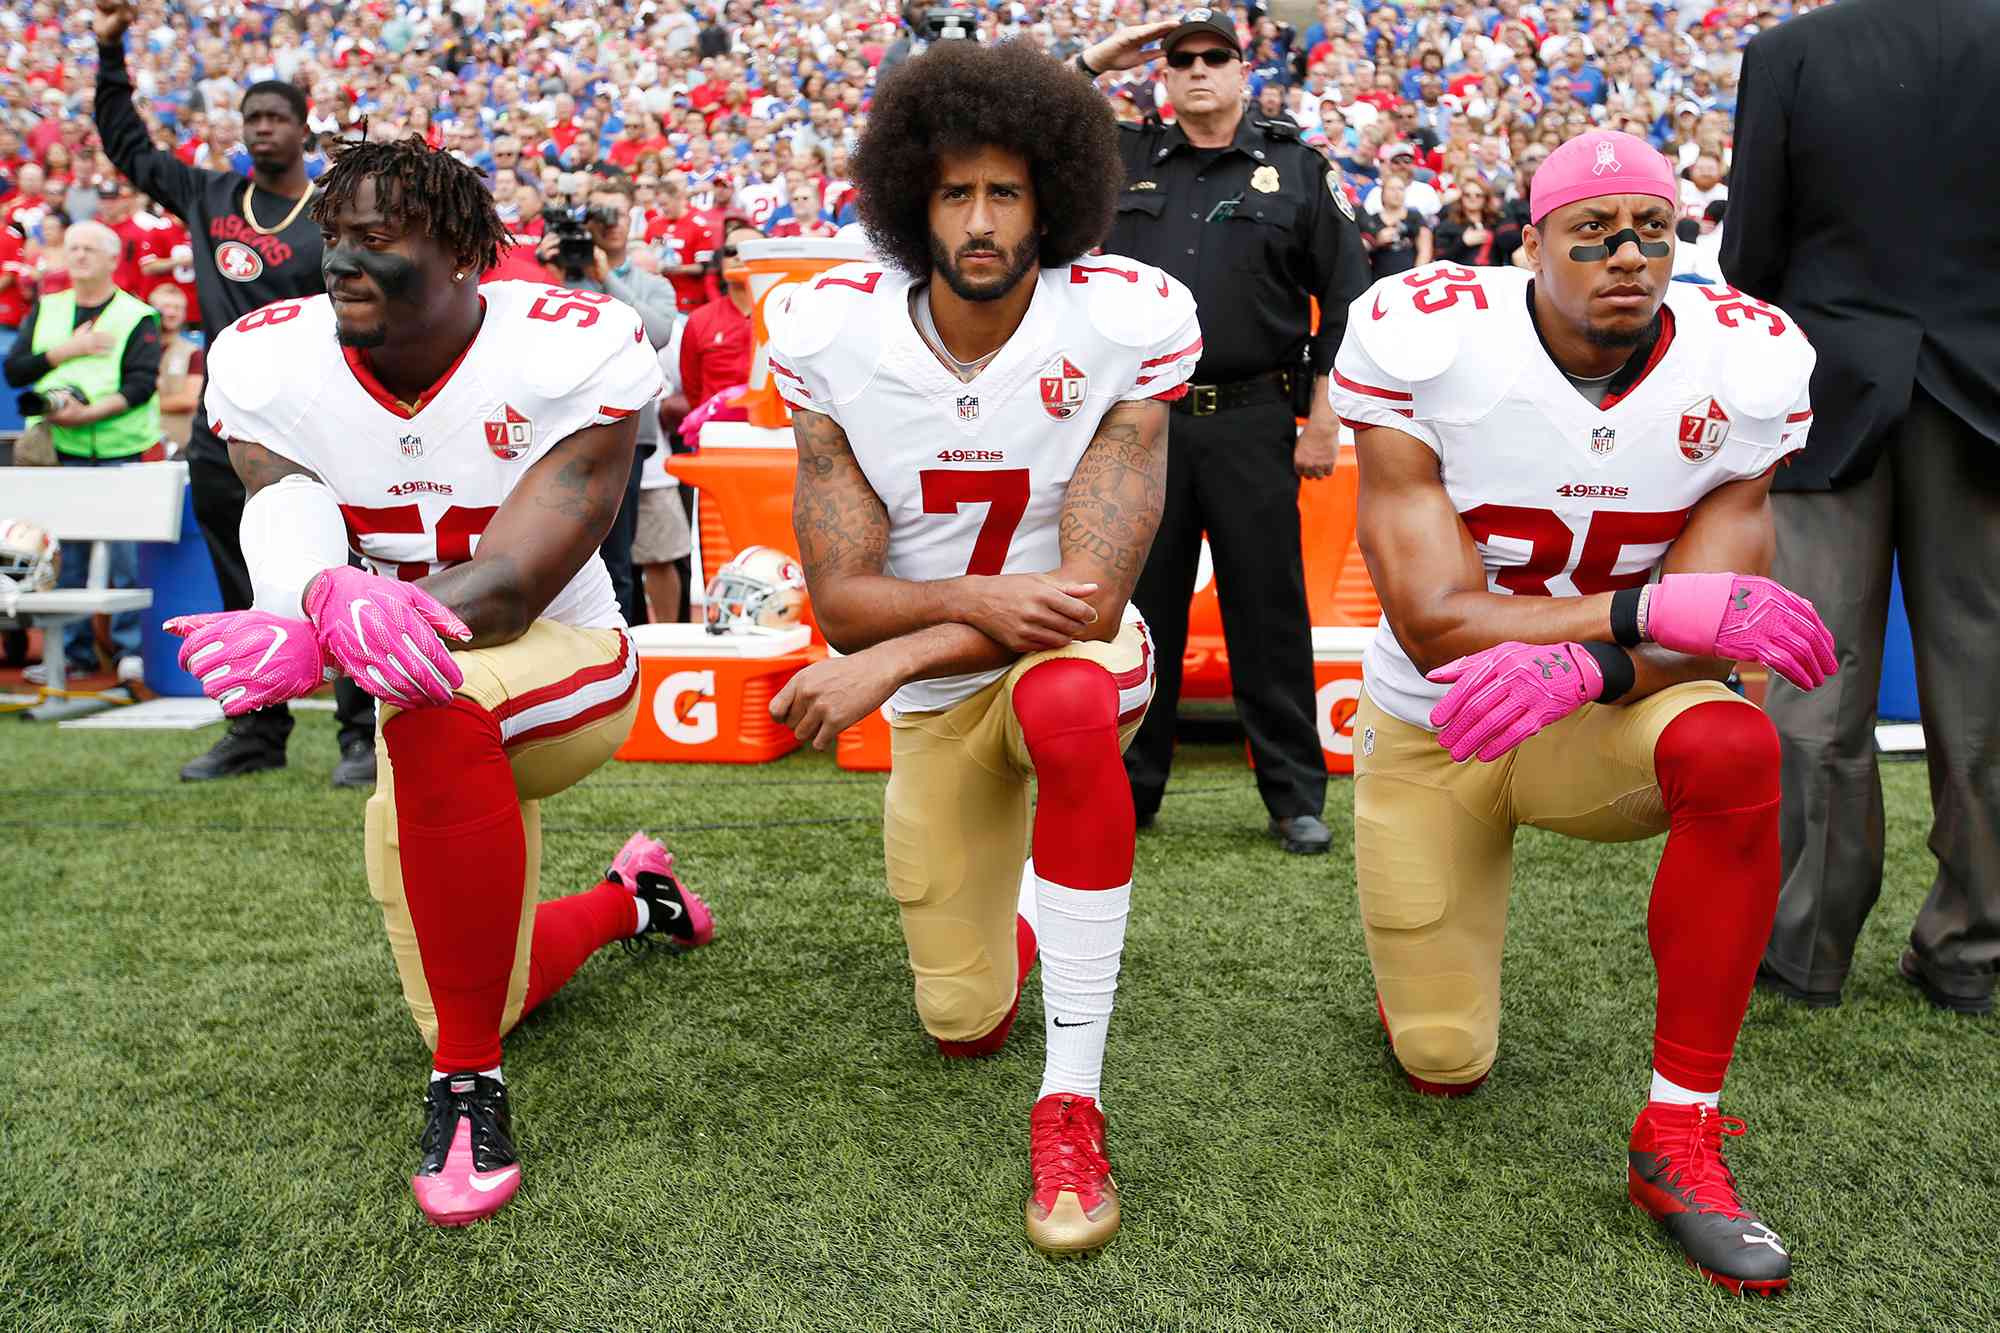 Eli Harold #58, Colin Kaepernick #7 and Eric Reid #35 of the San Francisco 49ers kneel in protest on the sideline, during the anthem